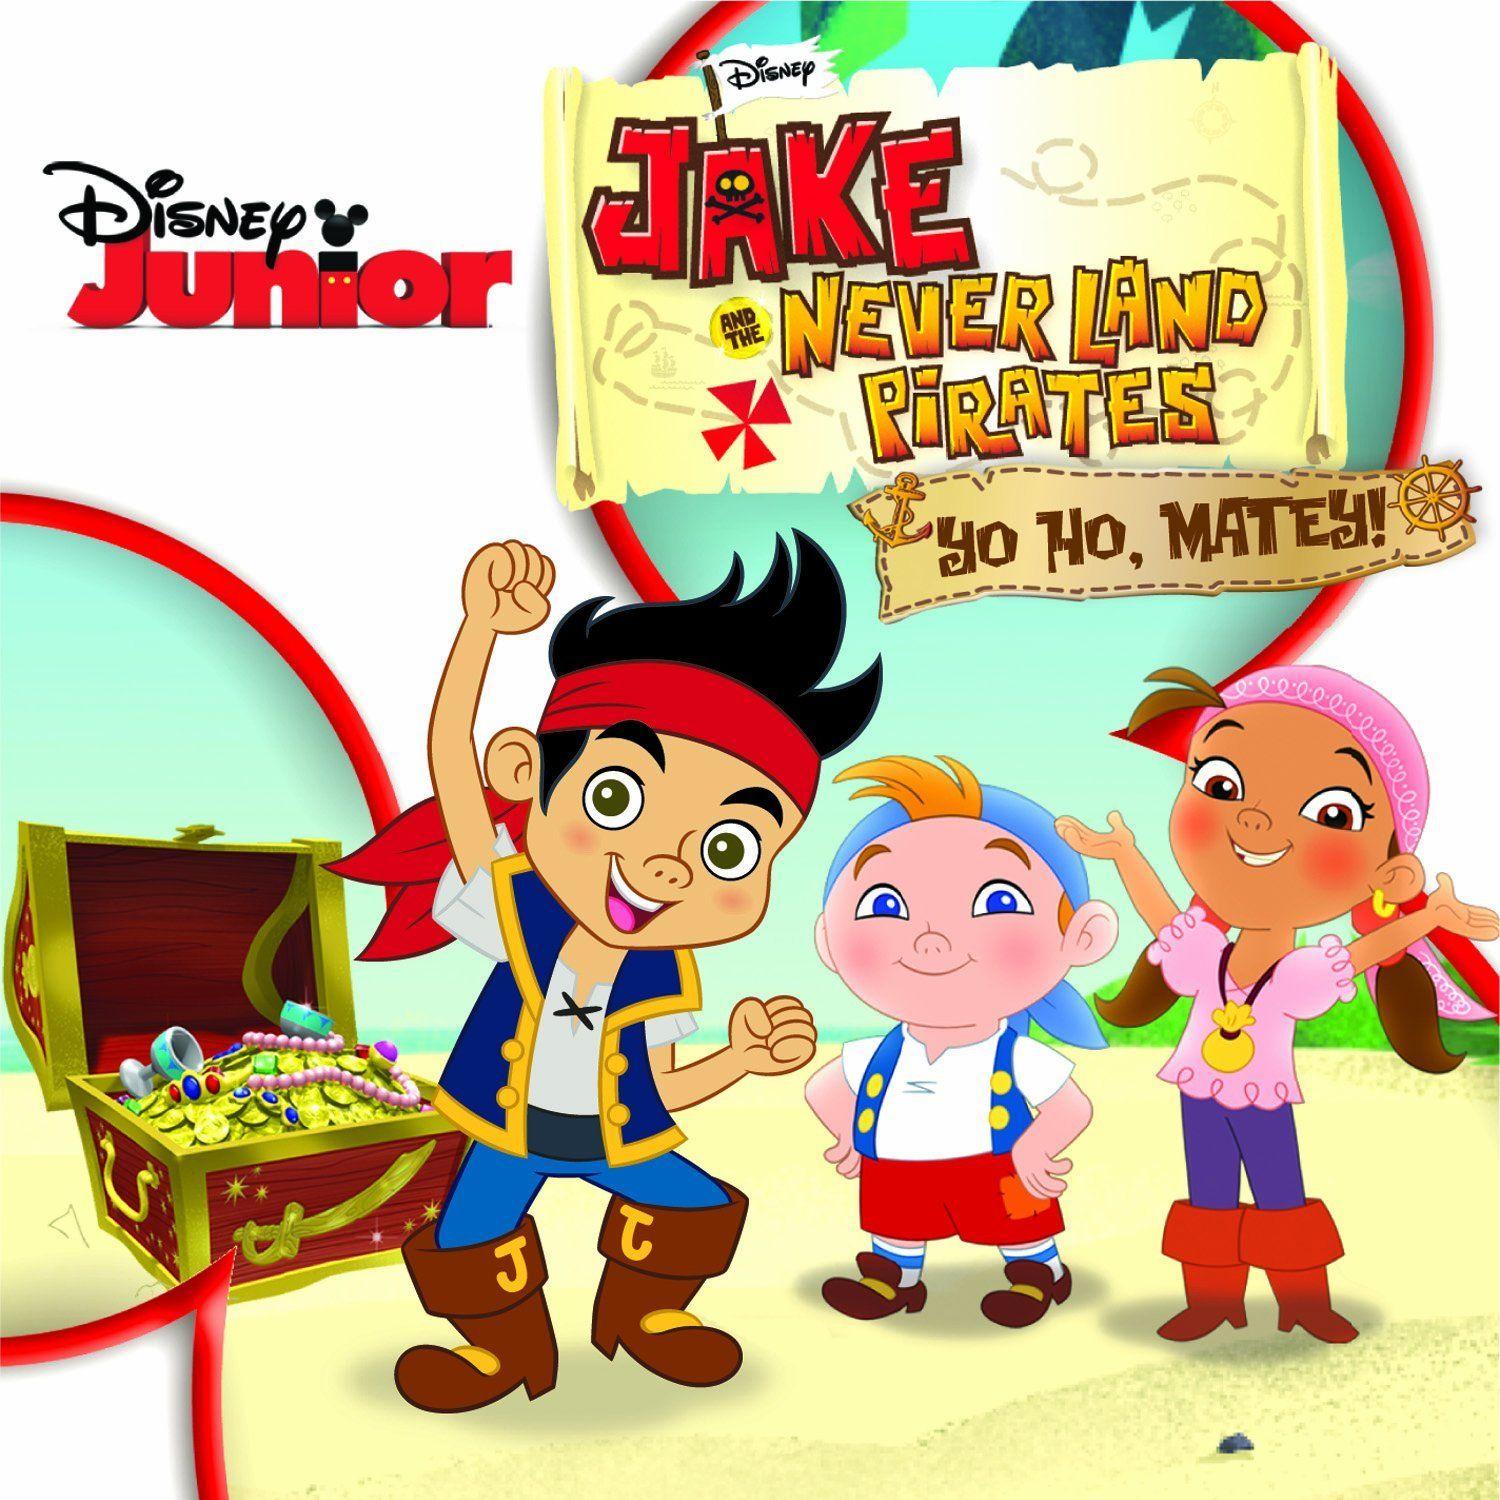 Jake and the Never Land Pirates: Yo Ho Matey CD Review and Party